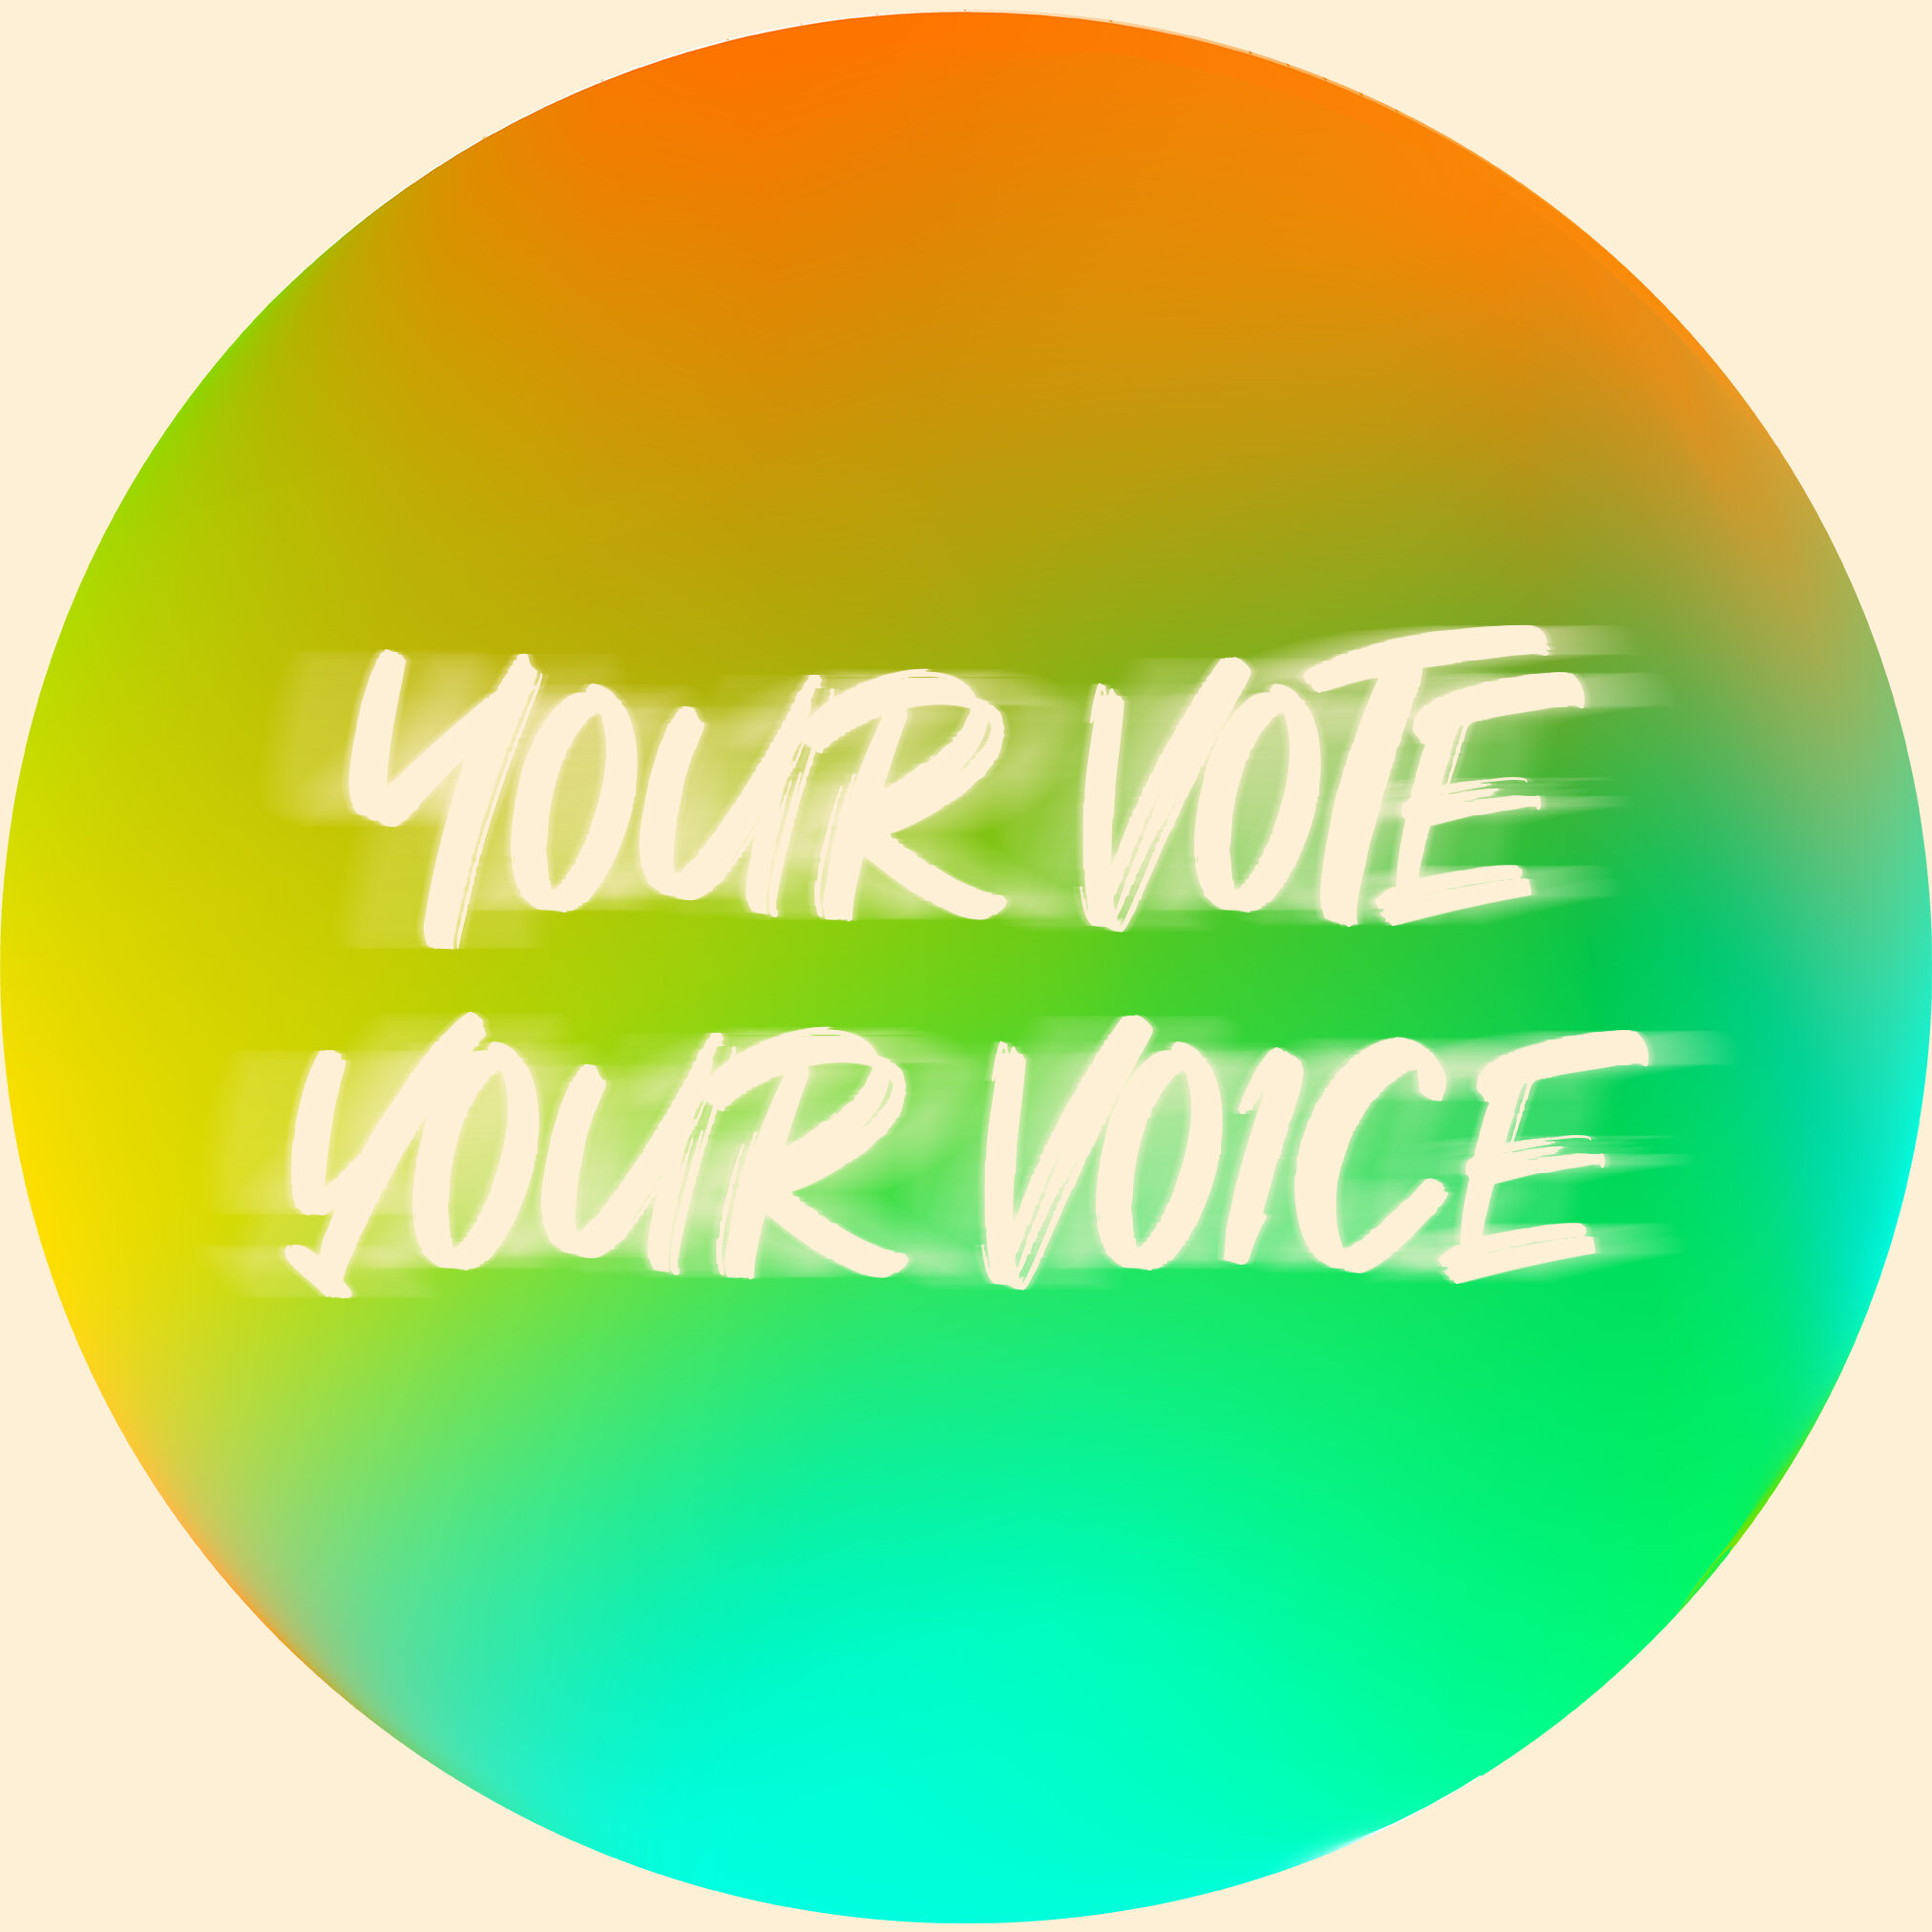 Your Vote, Your Voice